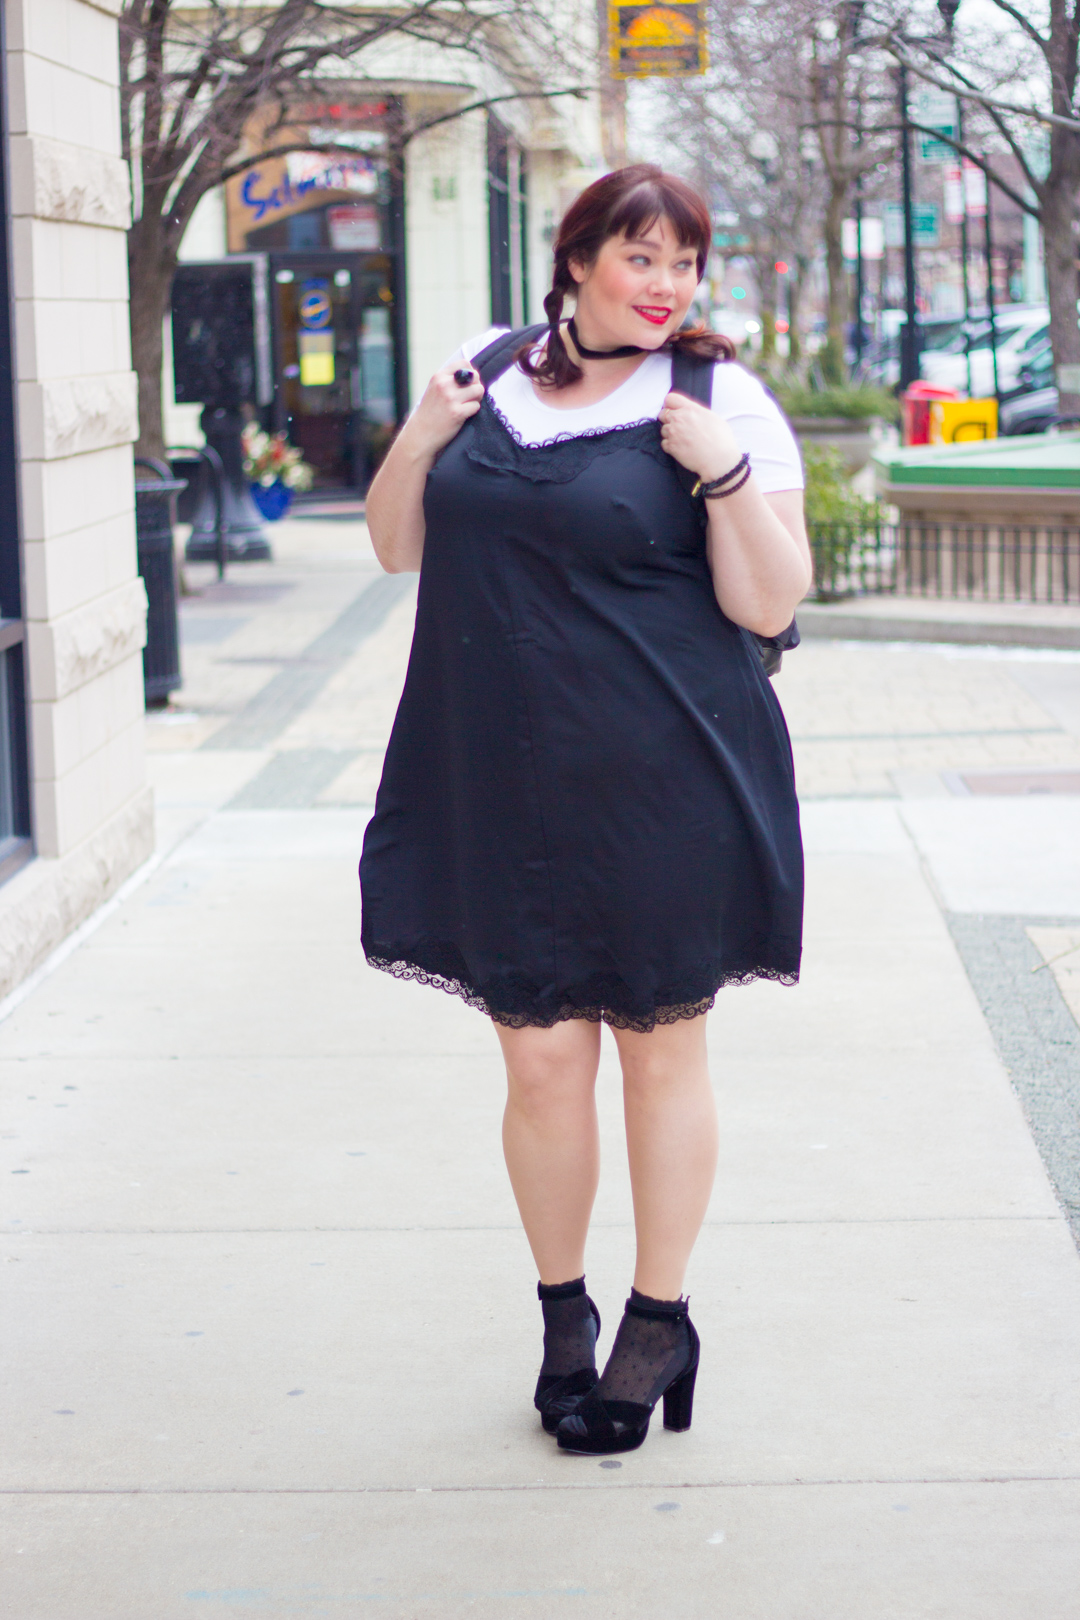 Chicago Plus Size Blogger wears a Glamour x Lane Bryant Slip Dress and rocks the 90s Fashion Trend T-shirts Under Slipdresses